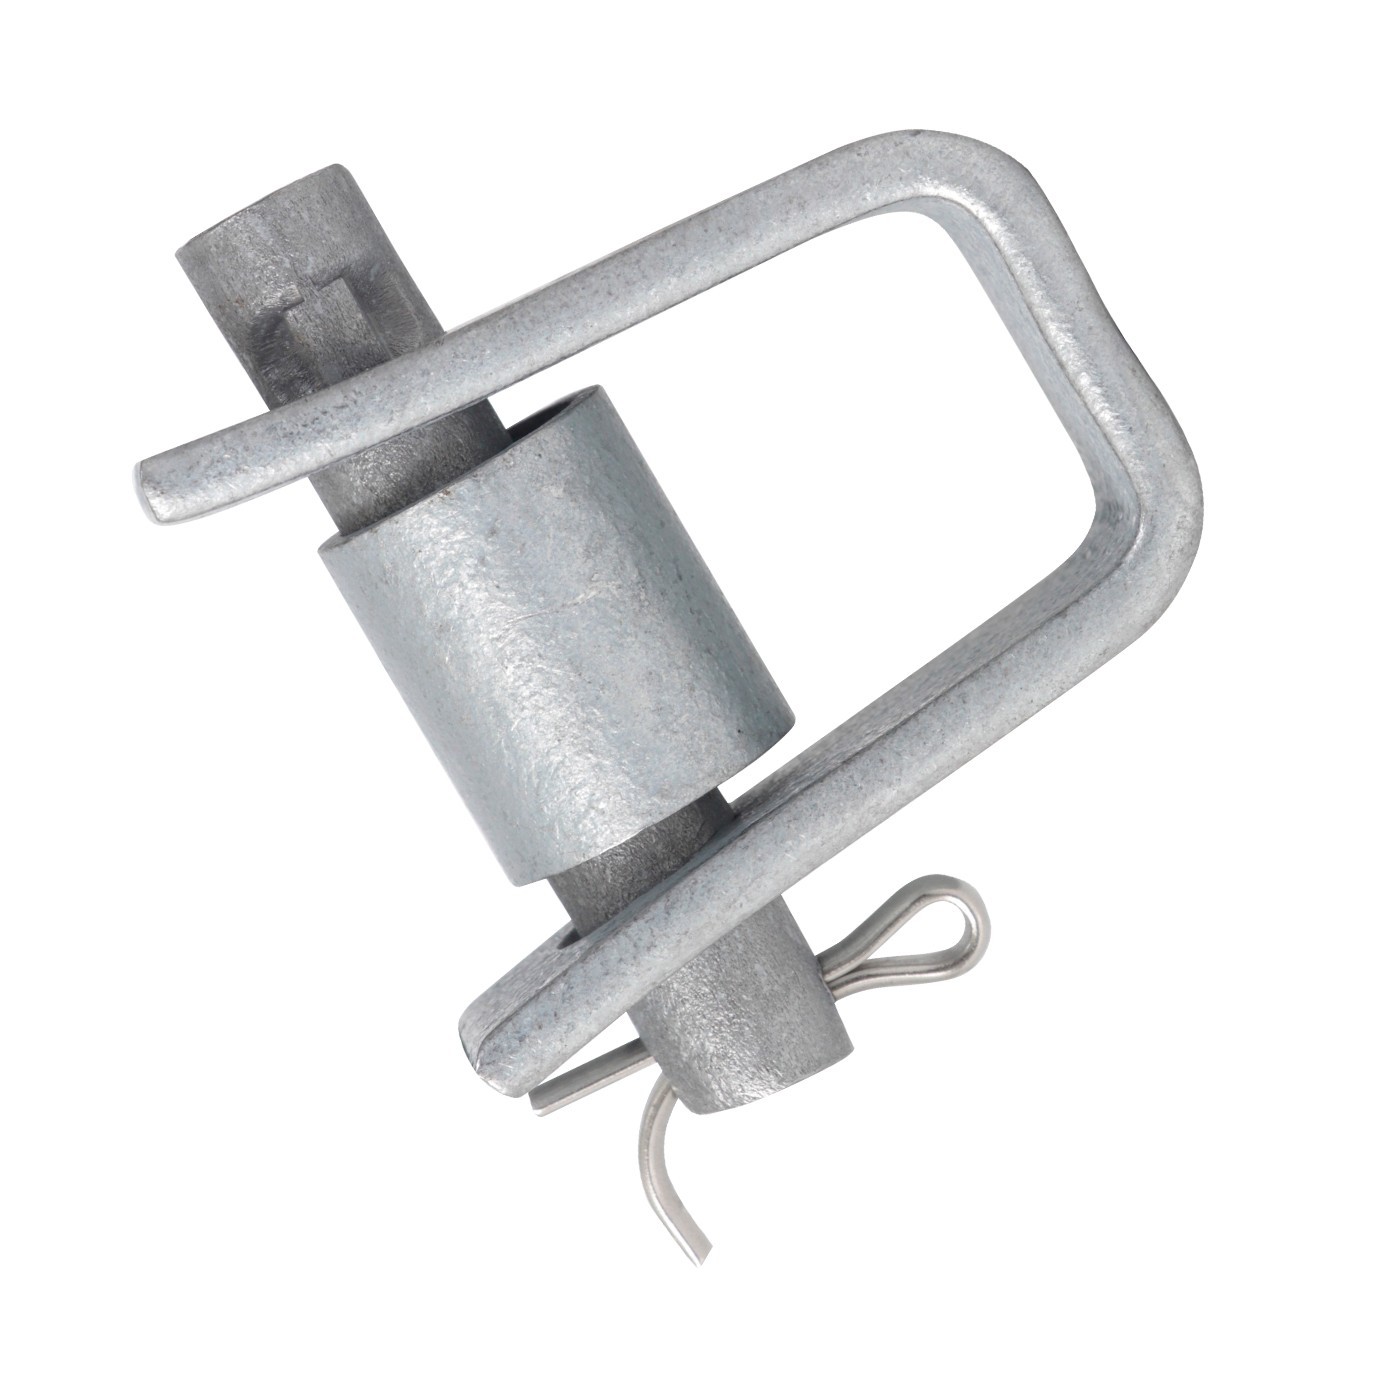 HOT DIP GALVANIZED STEEL  HDCH SMALL “D” TYPE CLEVIS